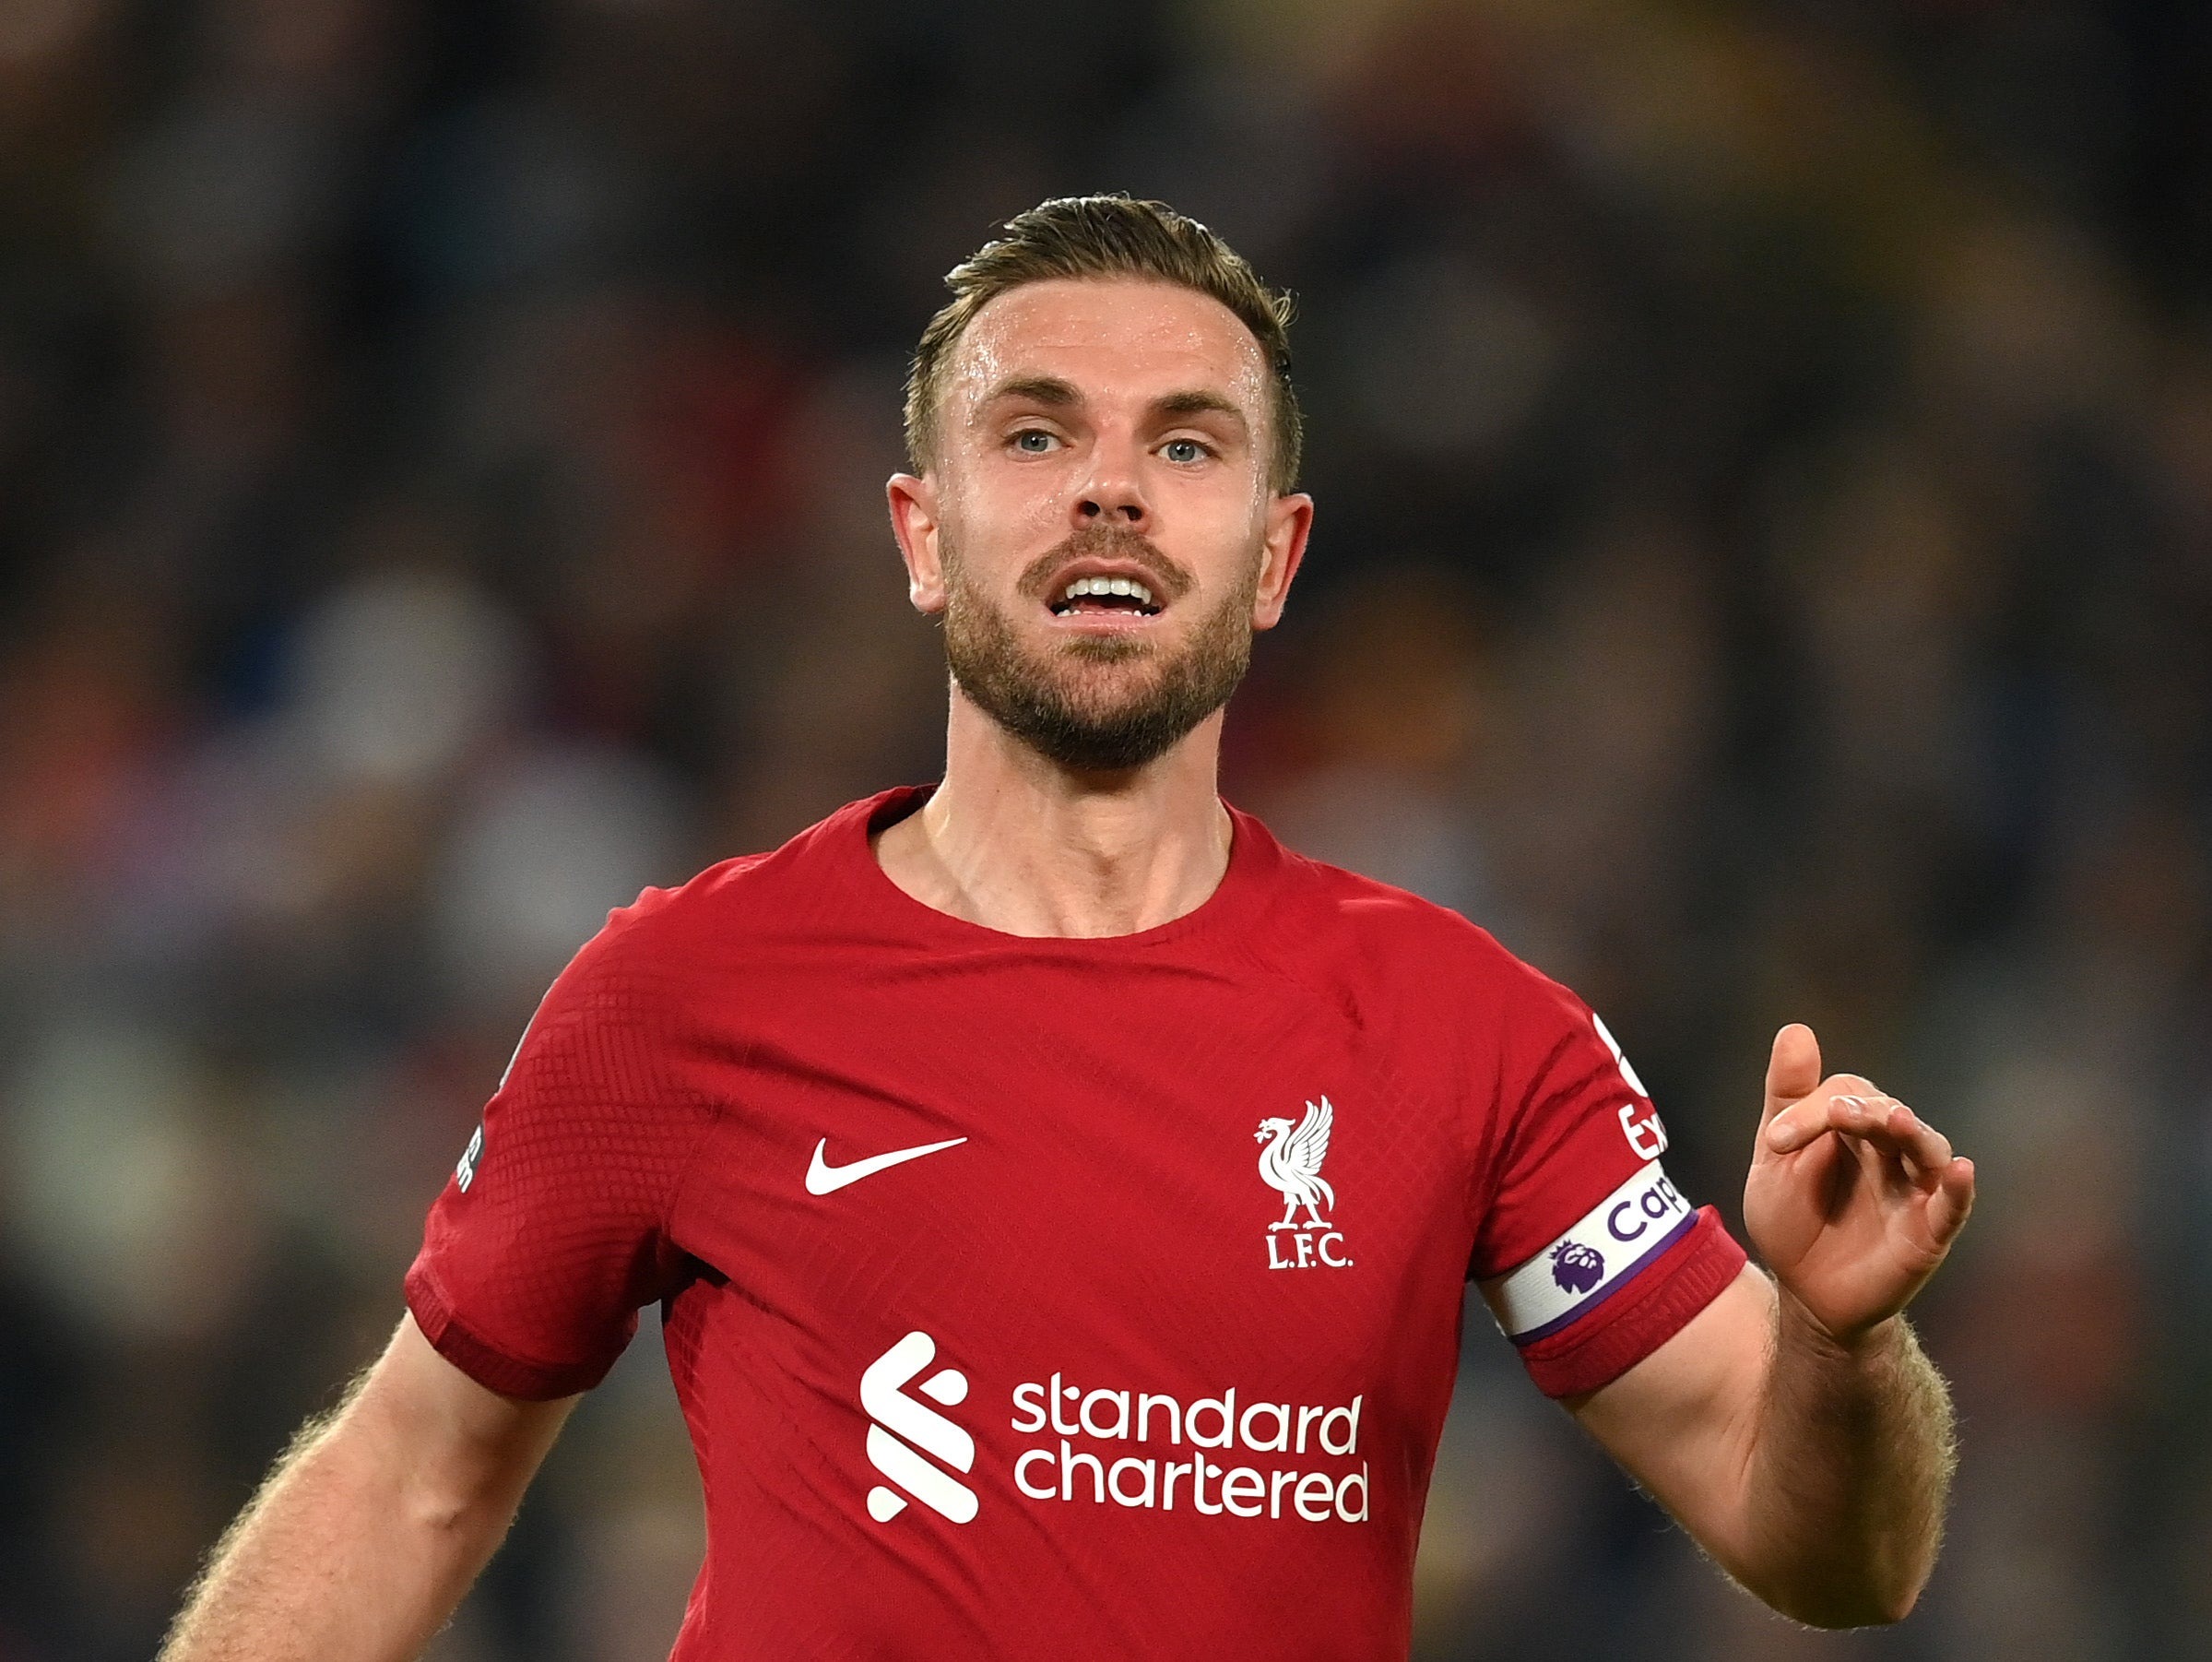 Jordan Henderson Praises a Liverpool Player After their Win Against Wolves, Saying 'Love to See it'